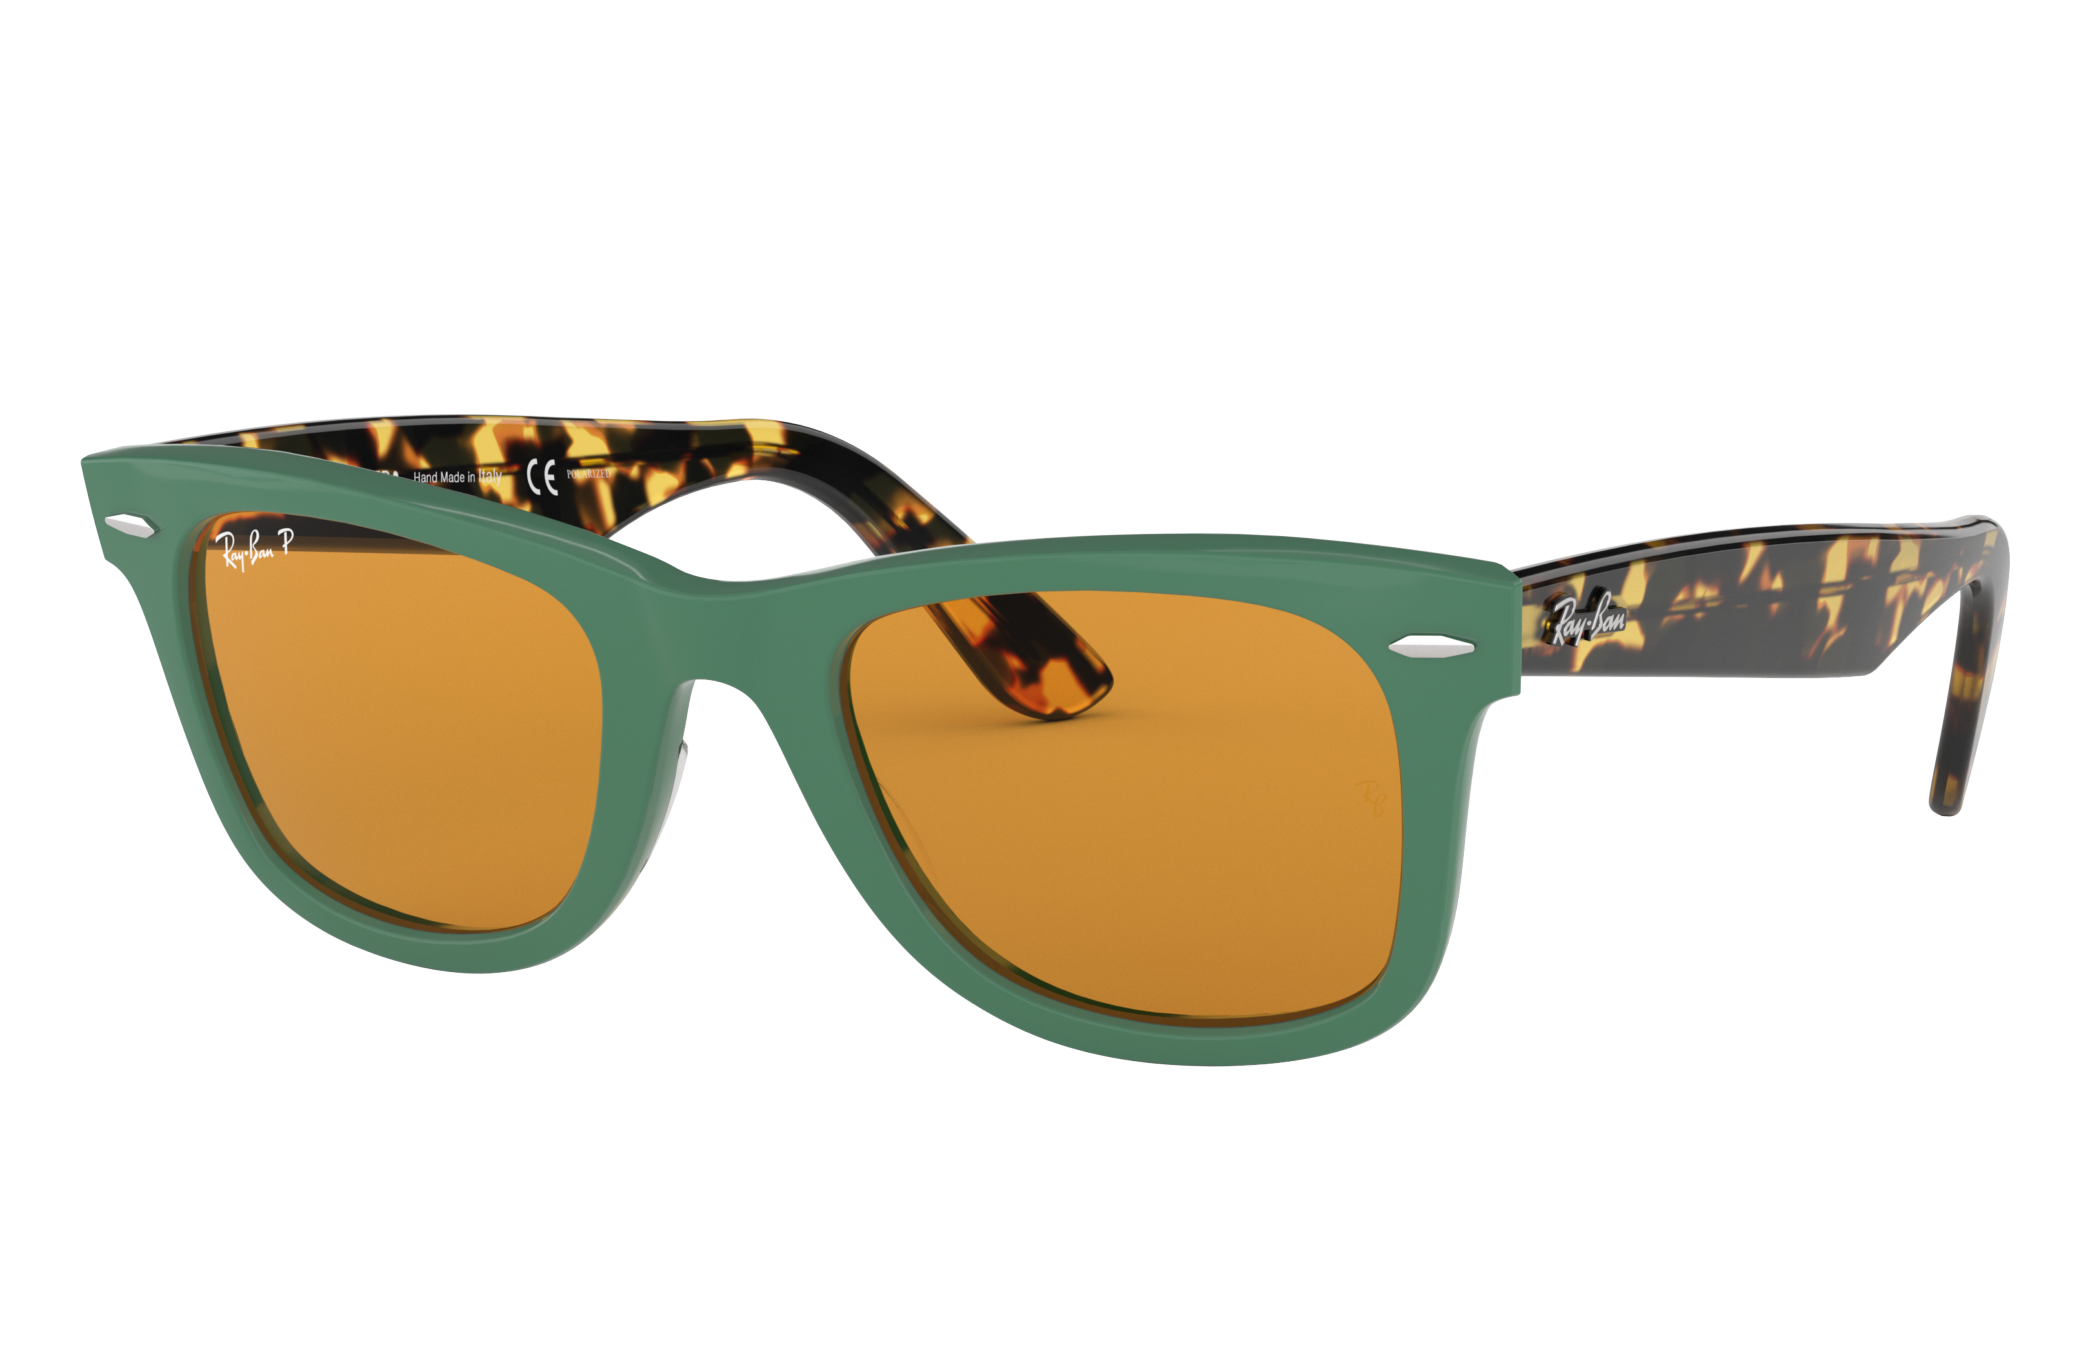 Ray Ban Hurry Only A Few Days Left Members Only Special Rewards Special Deals On All Your Favorite Styles To Say Thanks For Being Part Of The Family Only For The Ones Sign Up Now And Enjoy The Perks X Can T Find The Right Style Create Your Own